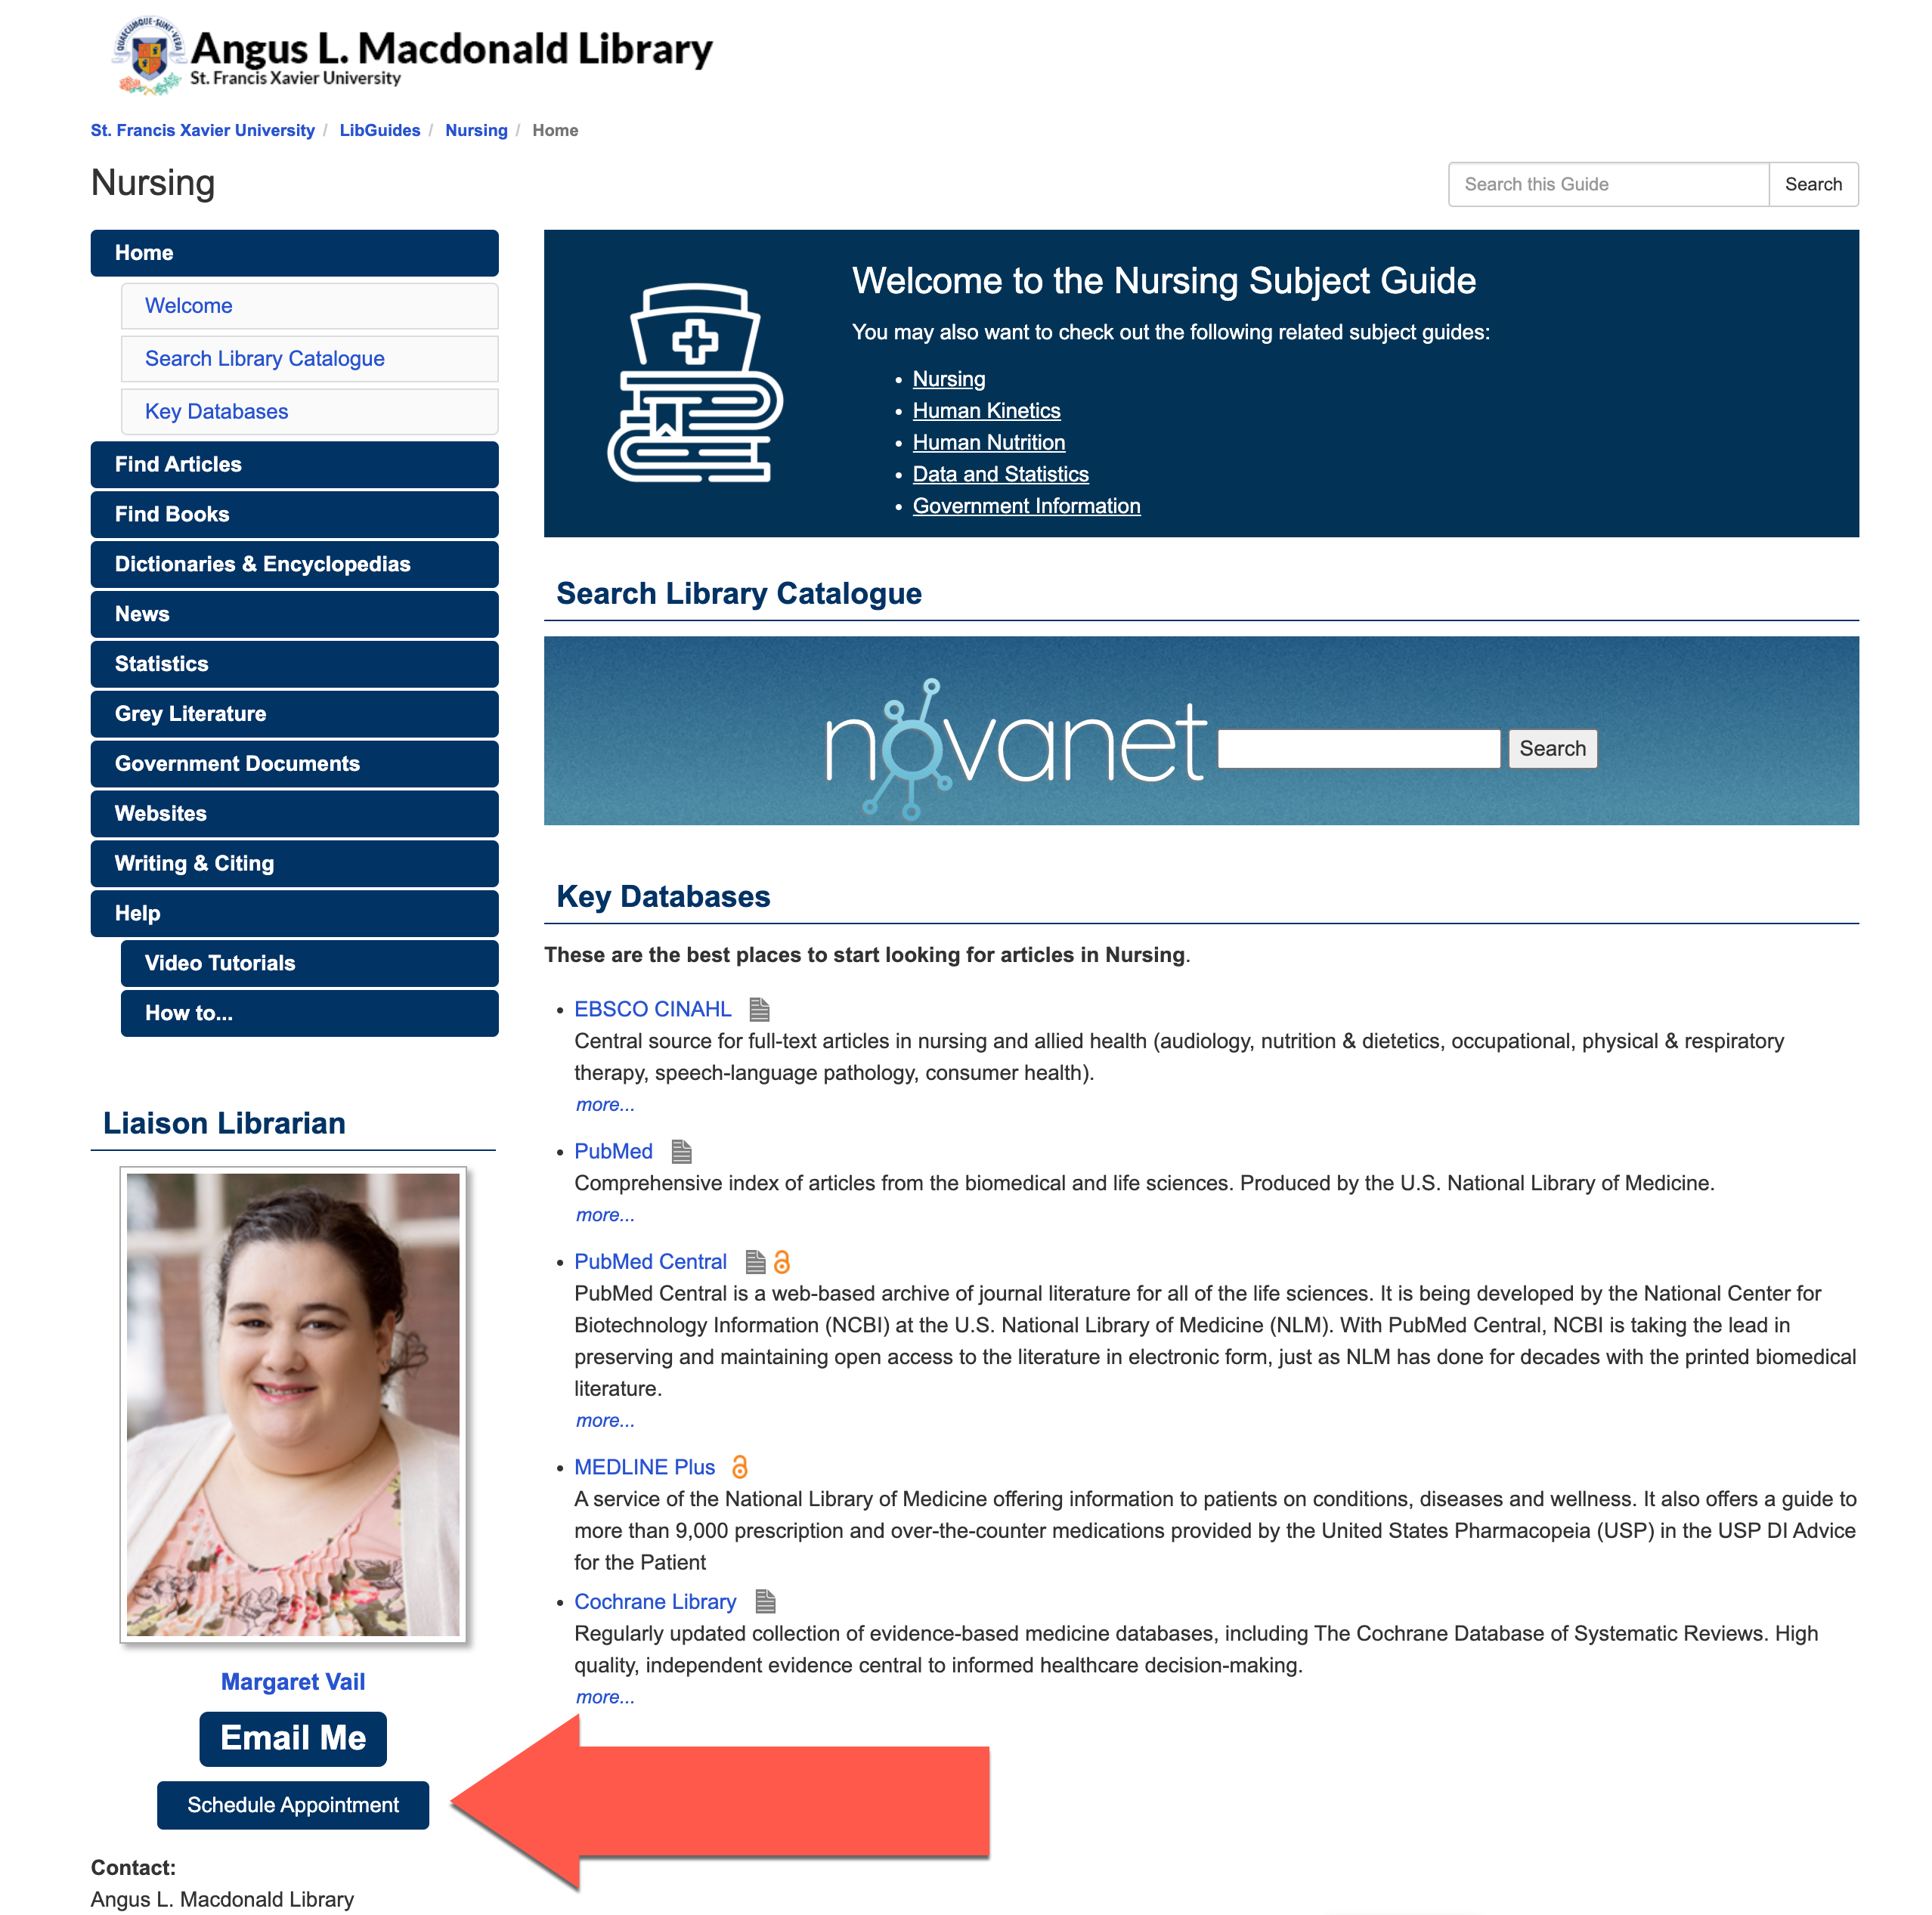 Screenshot of the Nursing Subject Guide highlighting the link to Schedule an appointment with Margaret Vail